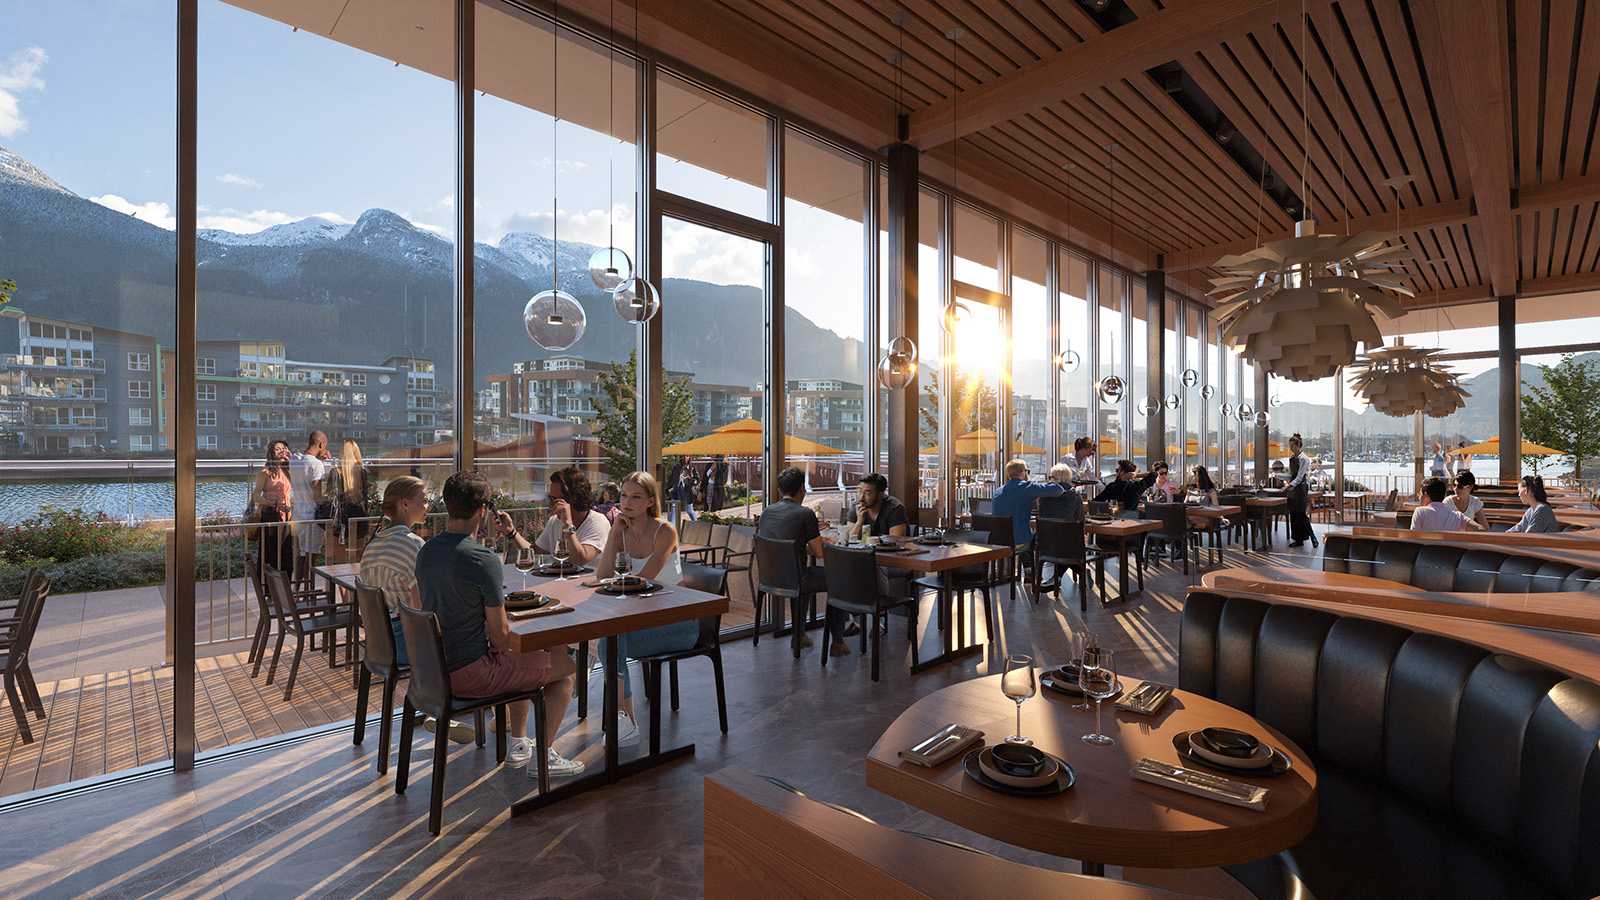 People in a restaurant with views of the mountains